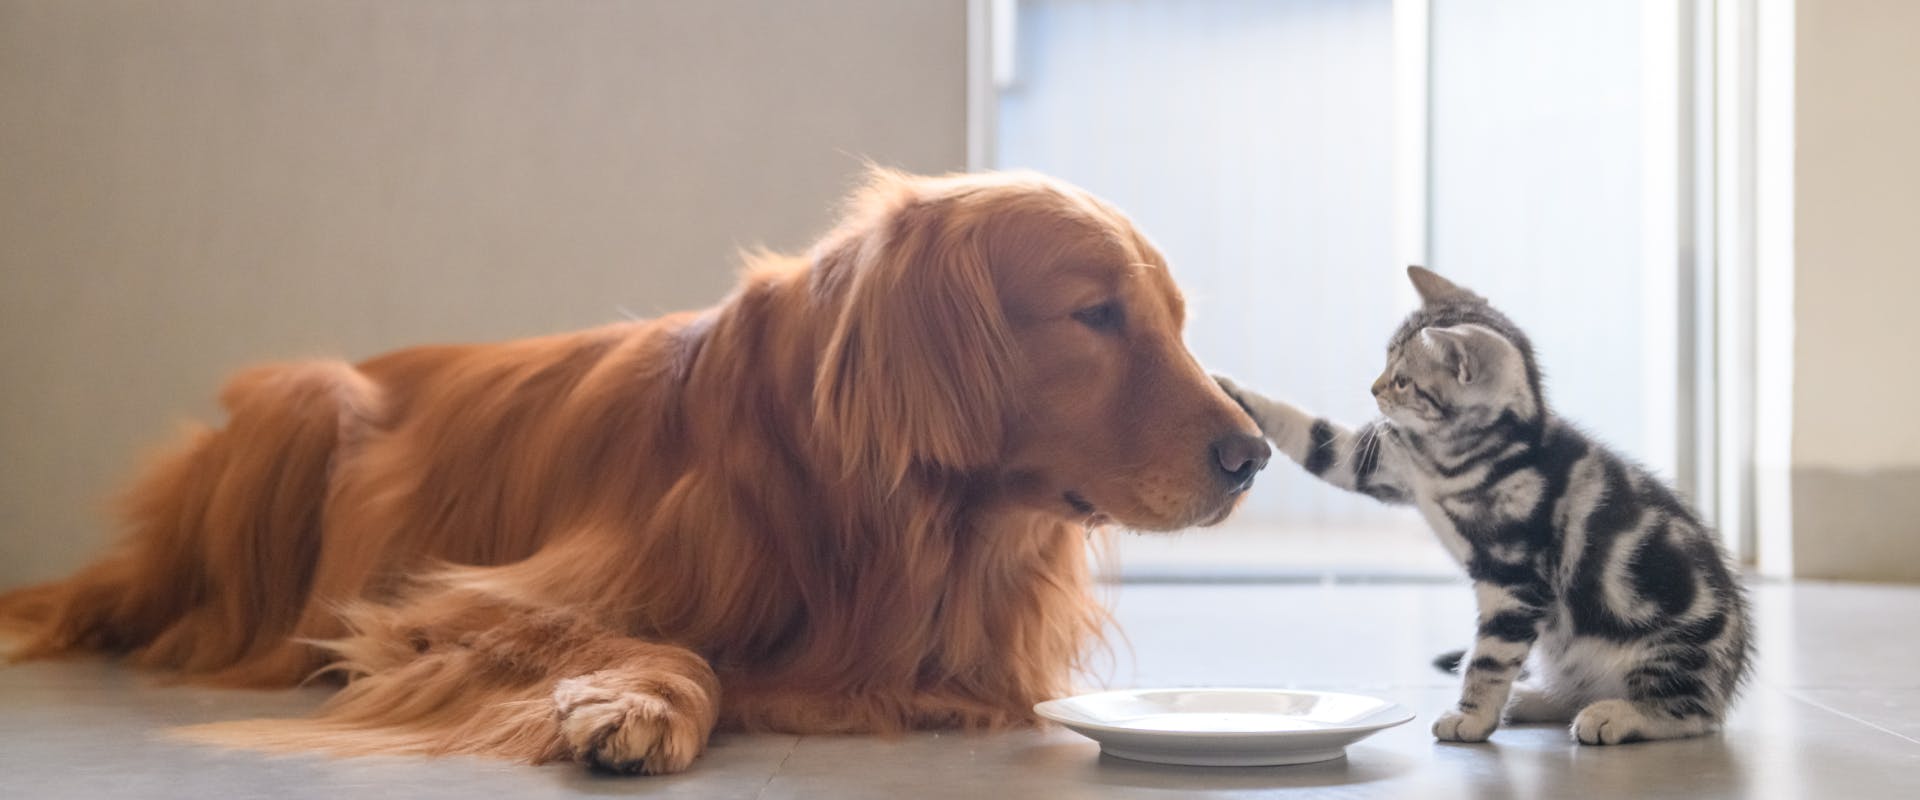 a golden retriever lying next to an empty food saucer and grey striped kitten, having its nose touched by the kitten's front paw